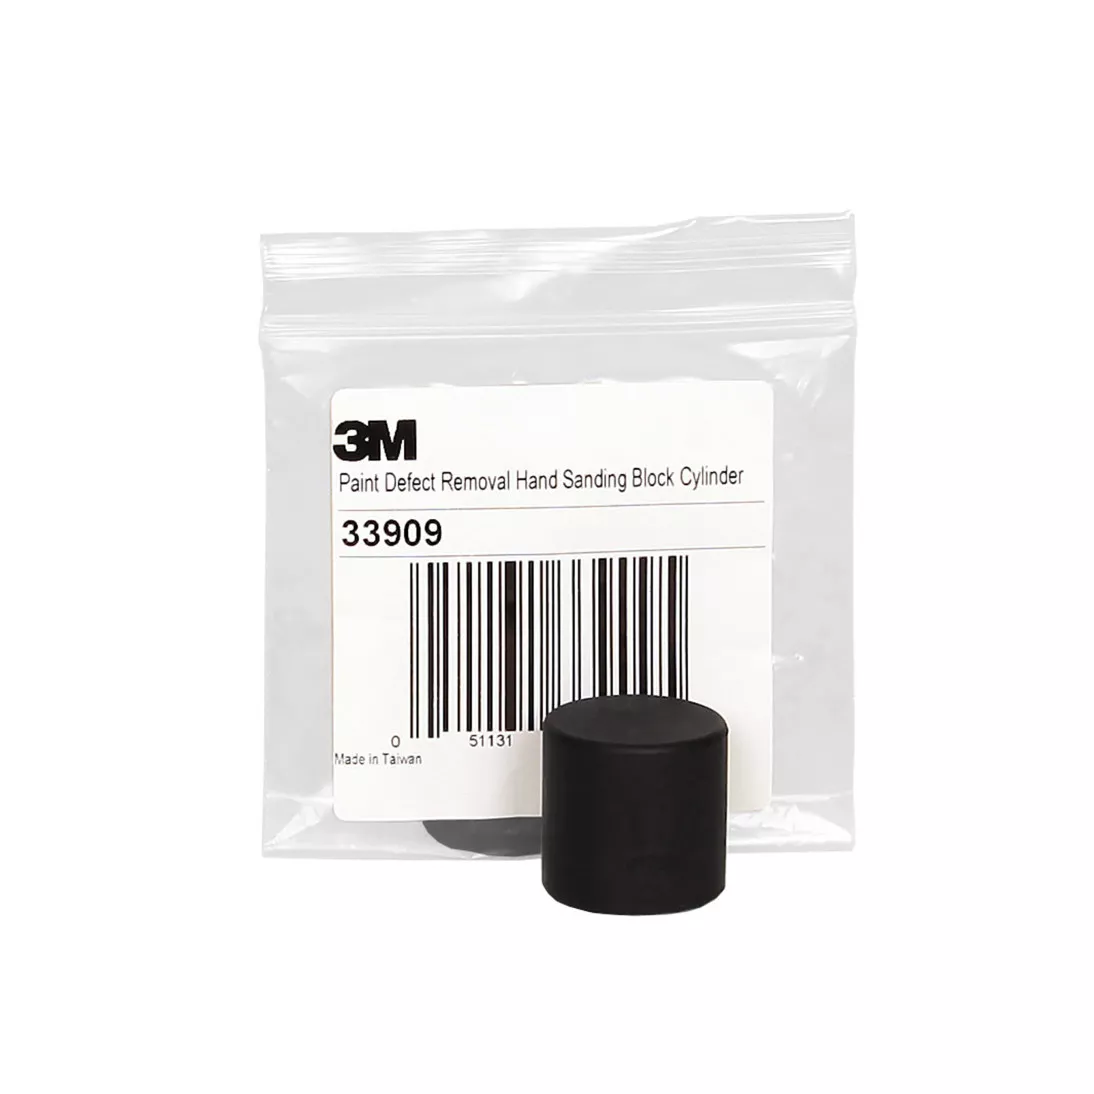 3M™ Paint Defect Removal Cylinder, 38909, 10 per case